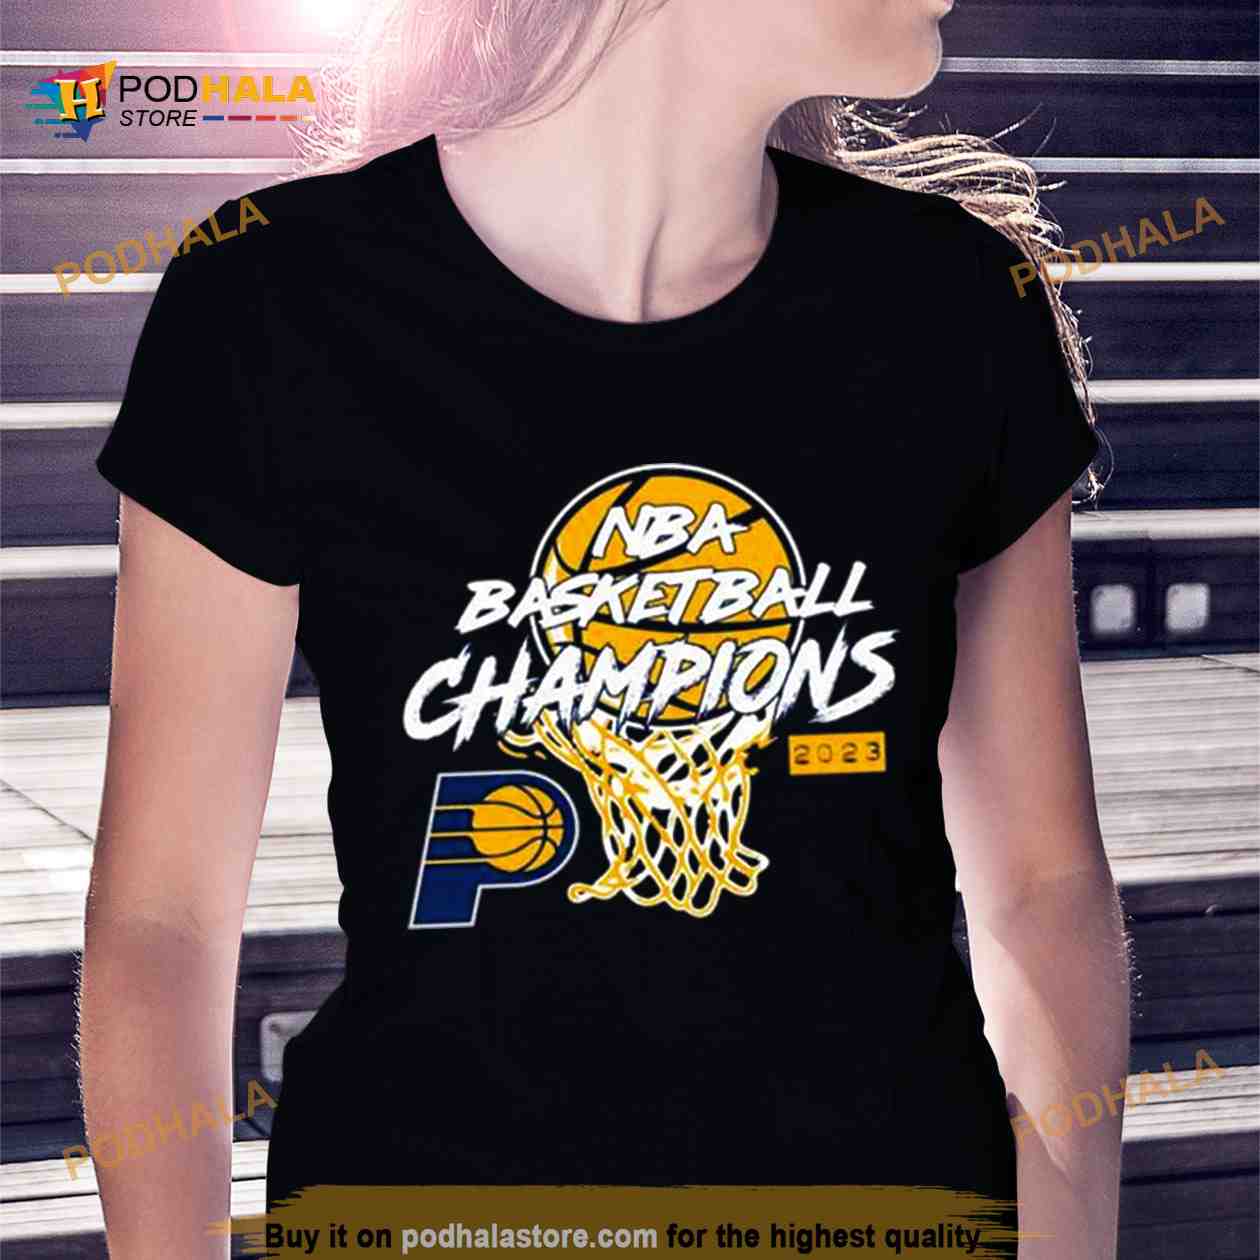 Indiana Pacers on NBA Store